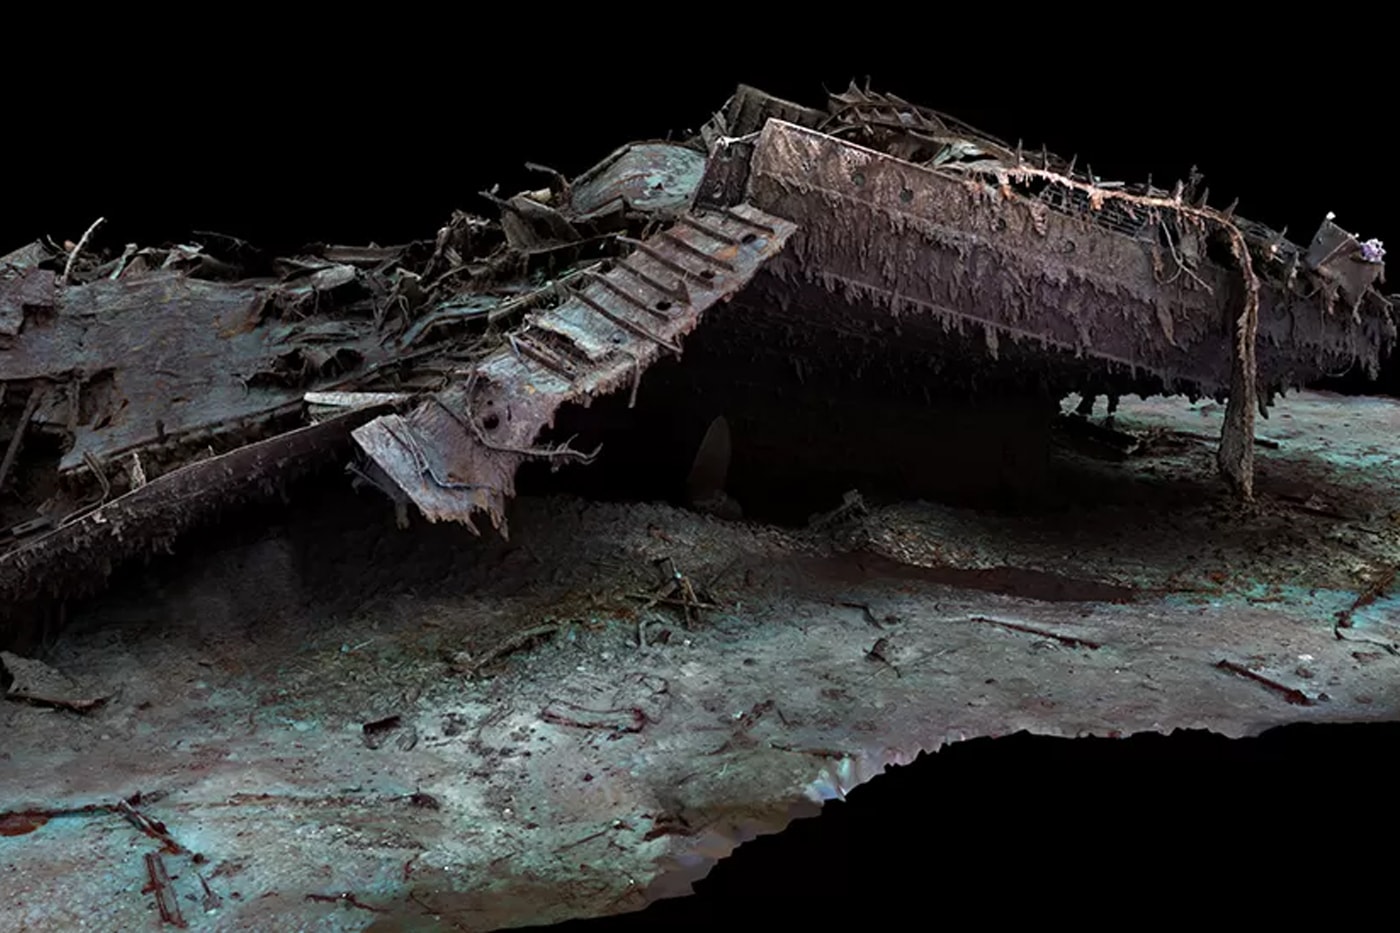 Romeo and Juliet Submersibles Capture First Full-Sized Scan of the Titanic 3D what happened info